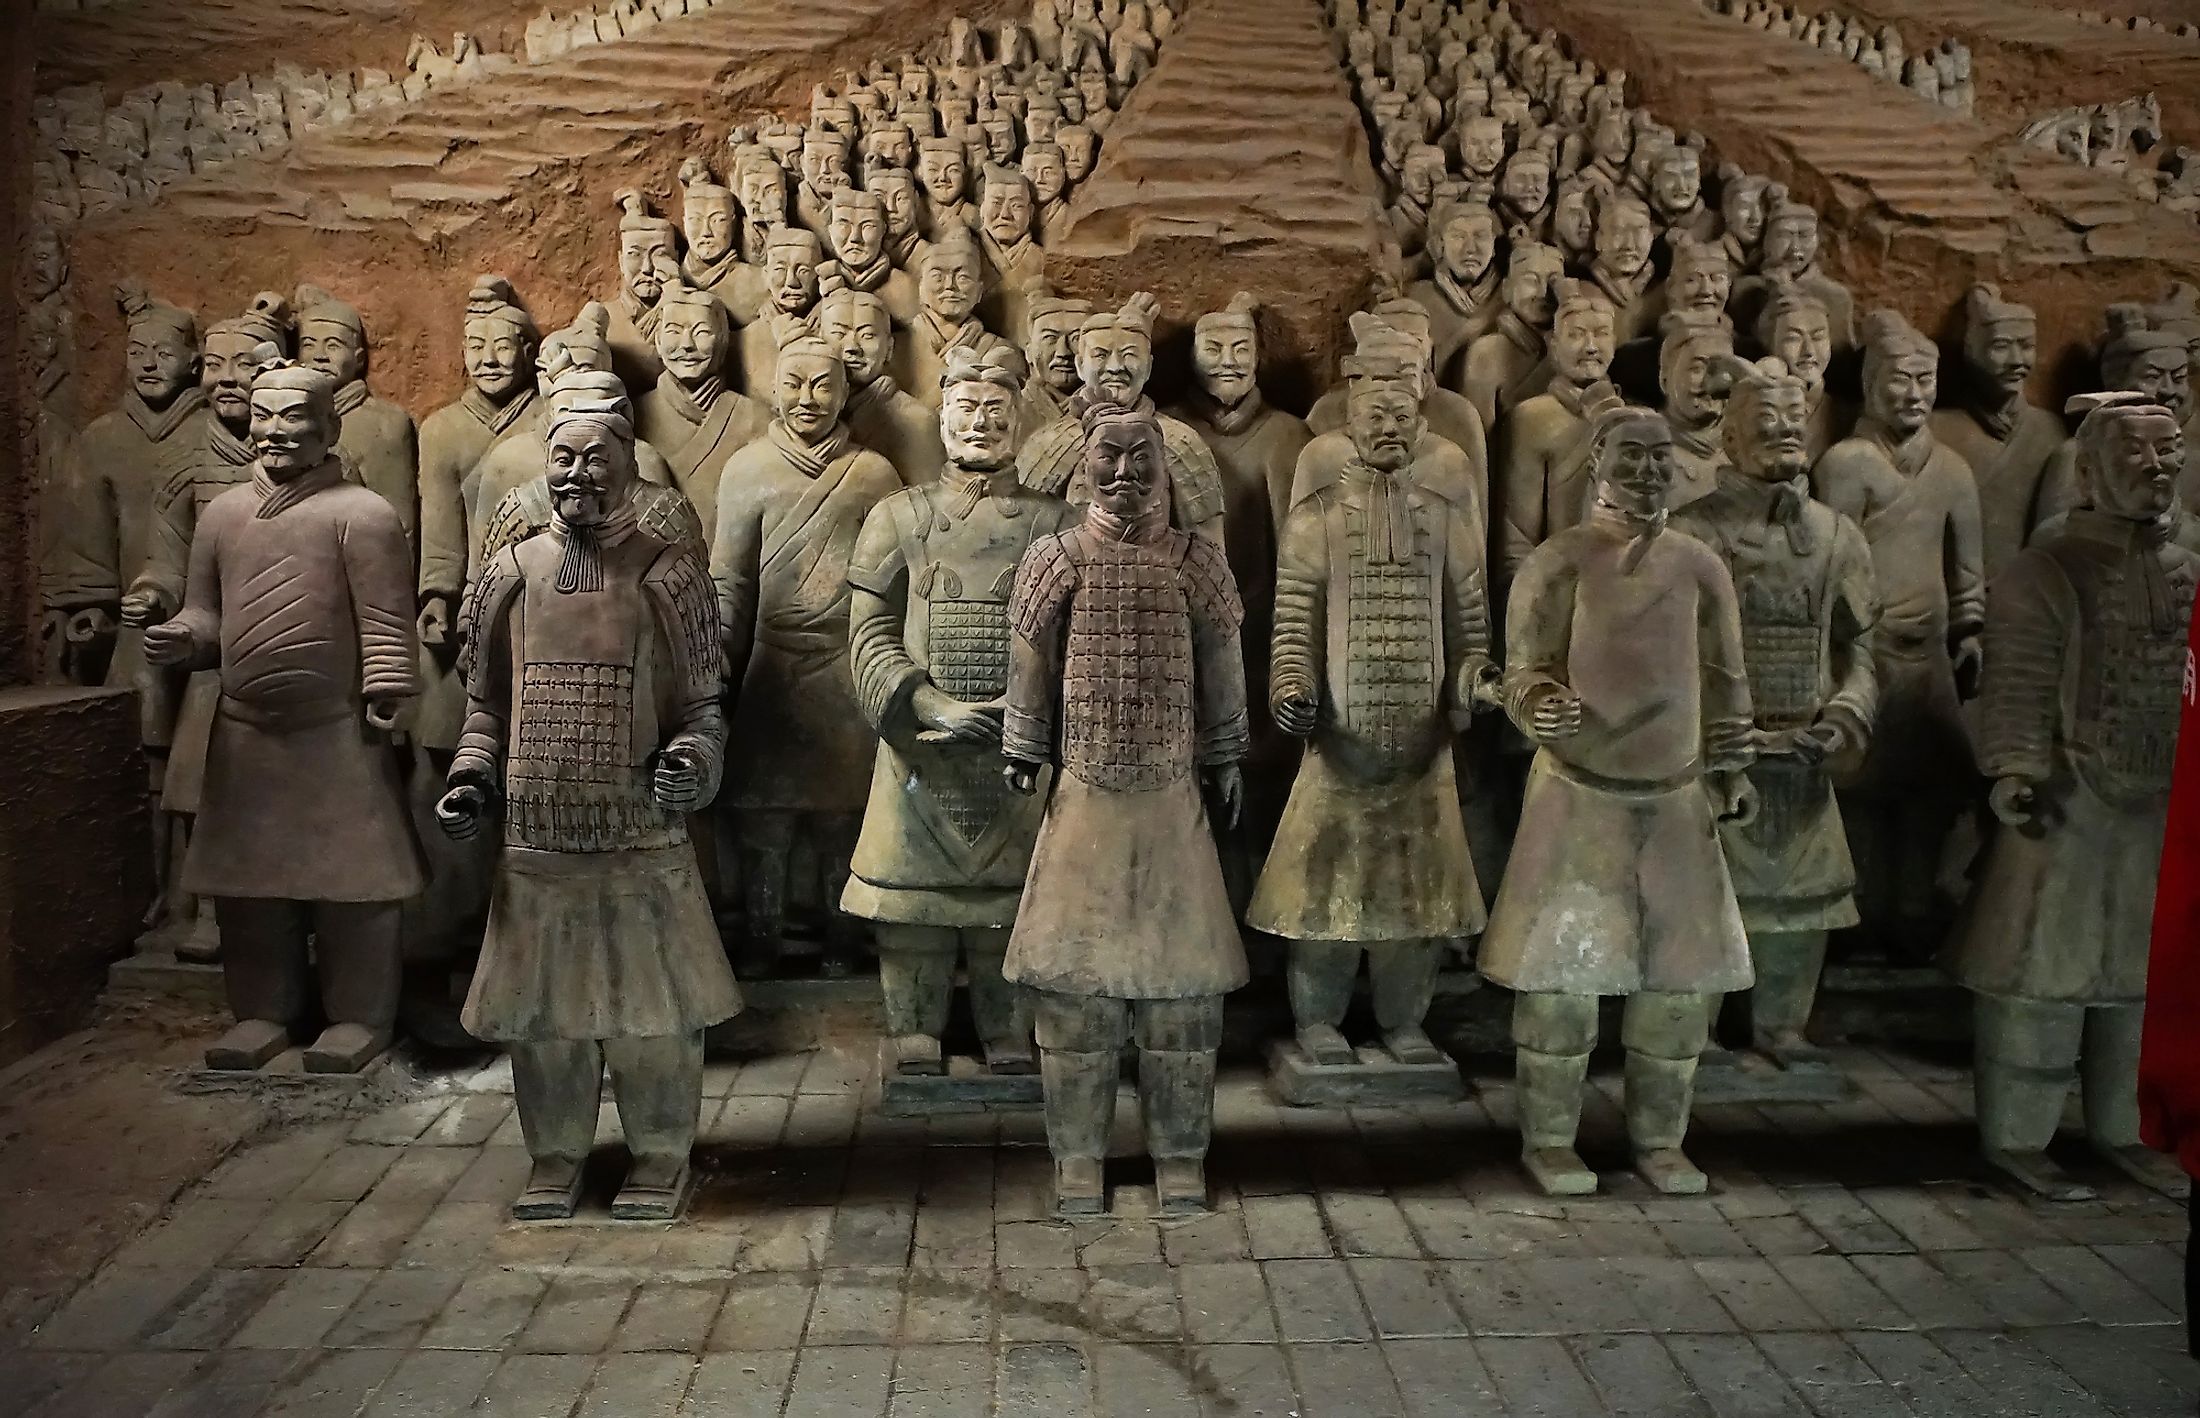 The Terracotta Army in the Emperor Qinshihuang's Mausoleum Site Museum.